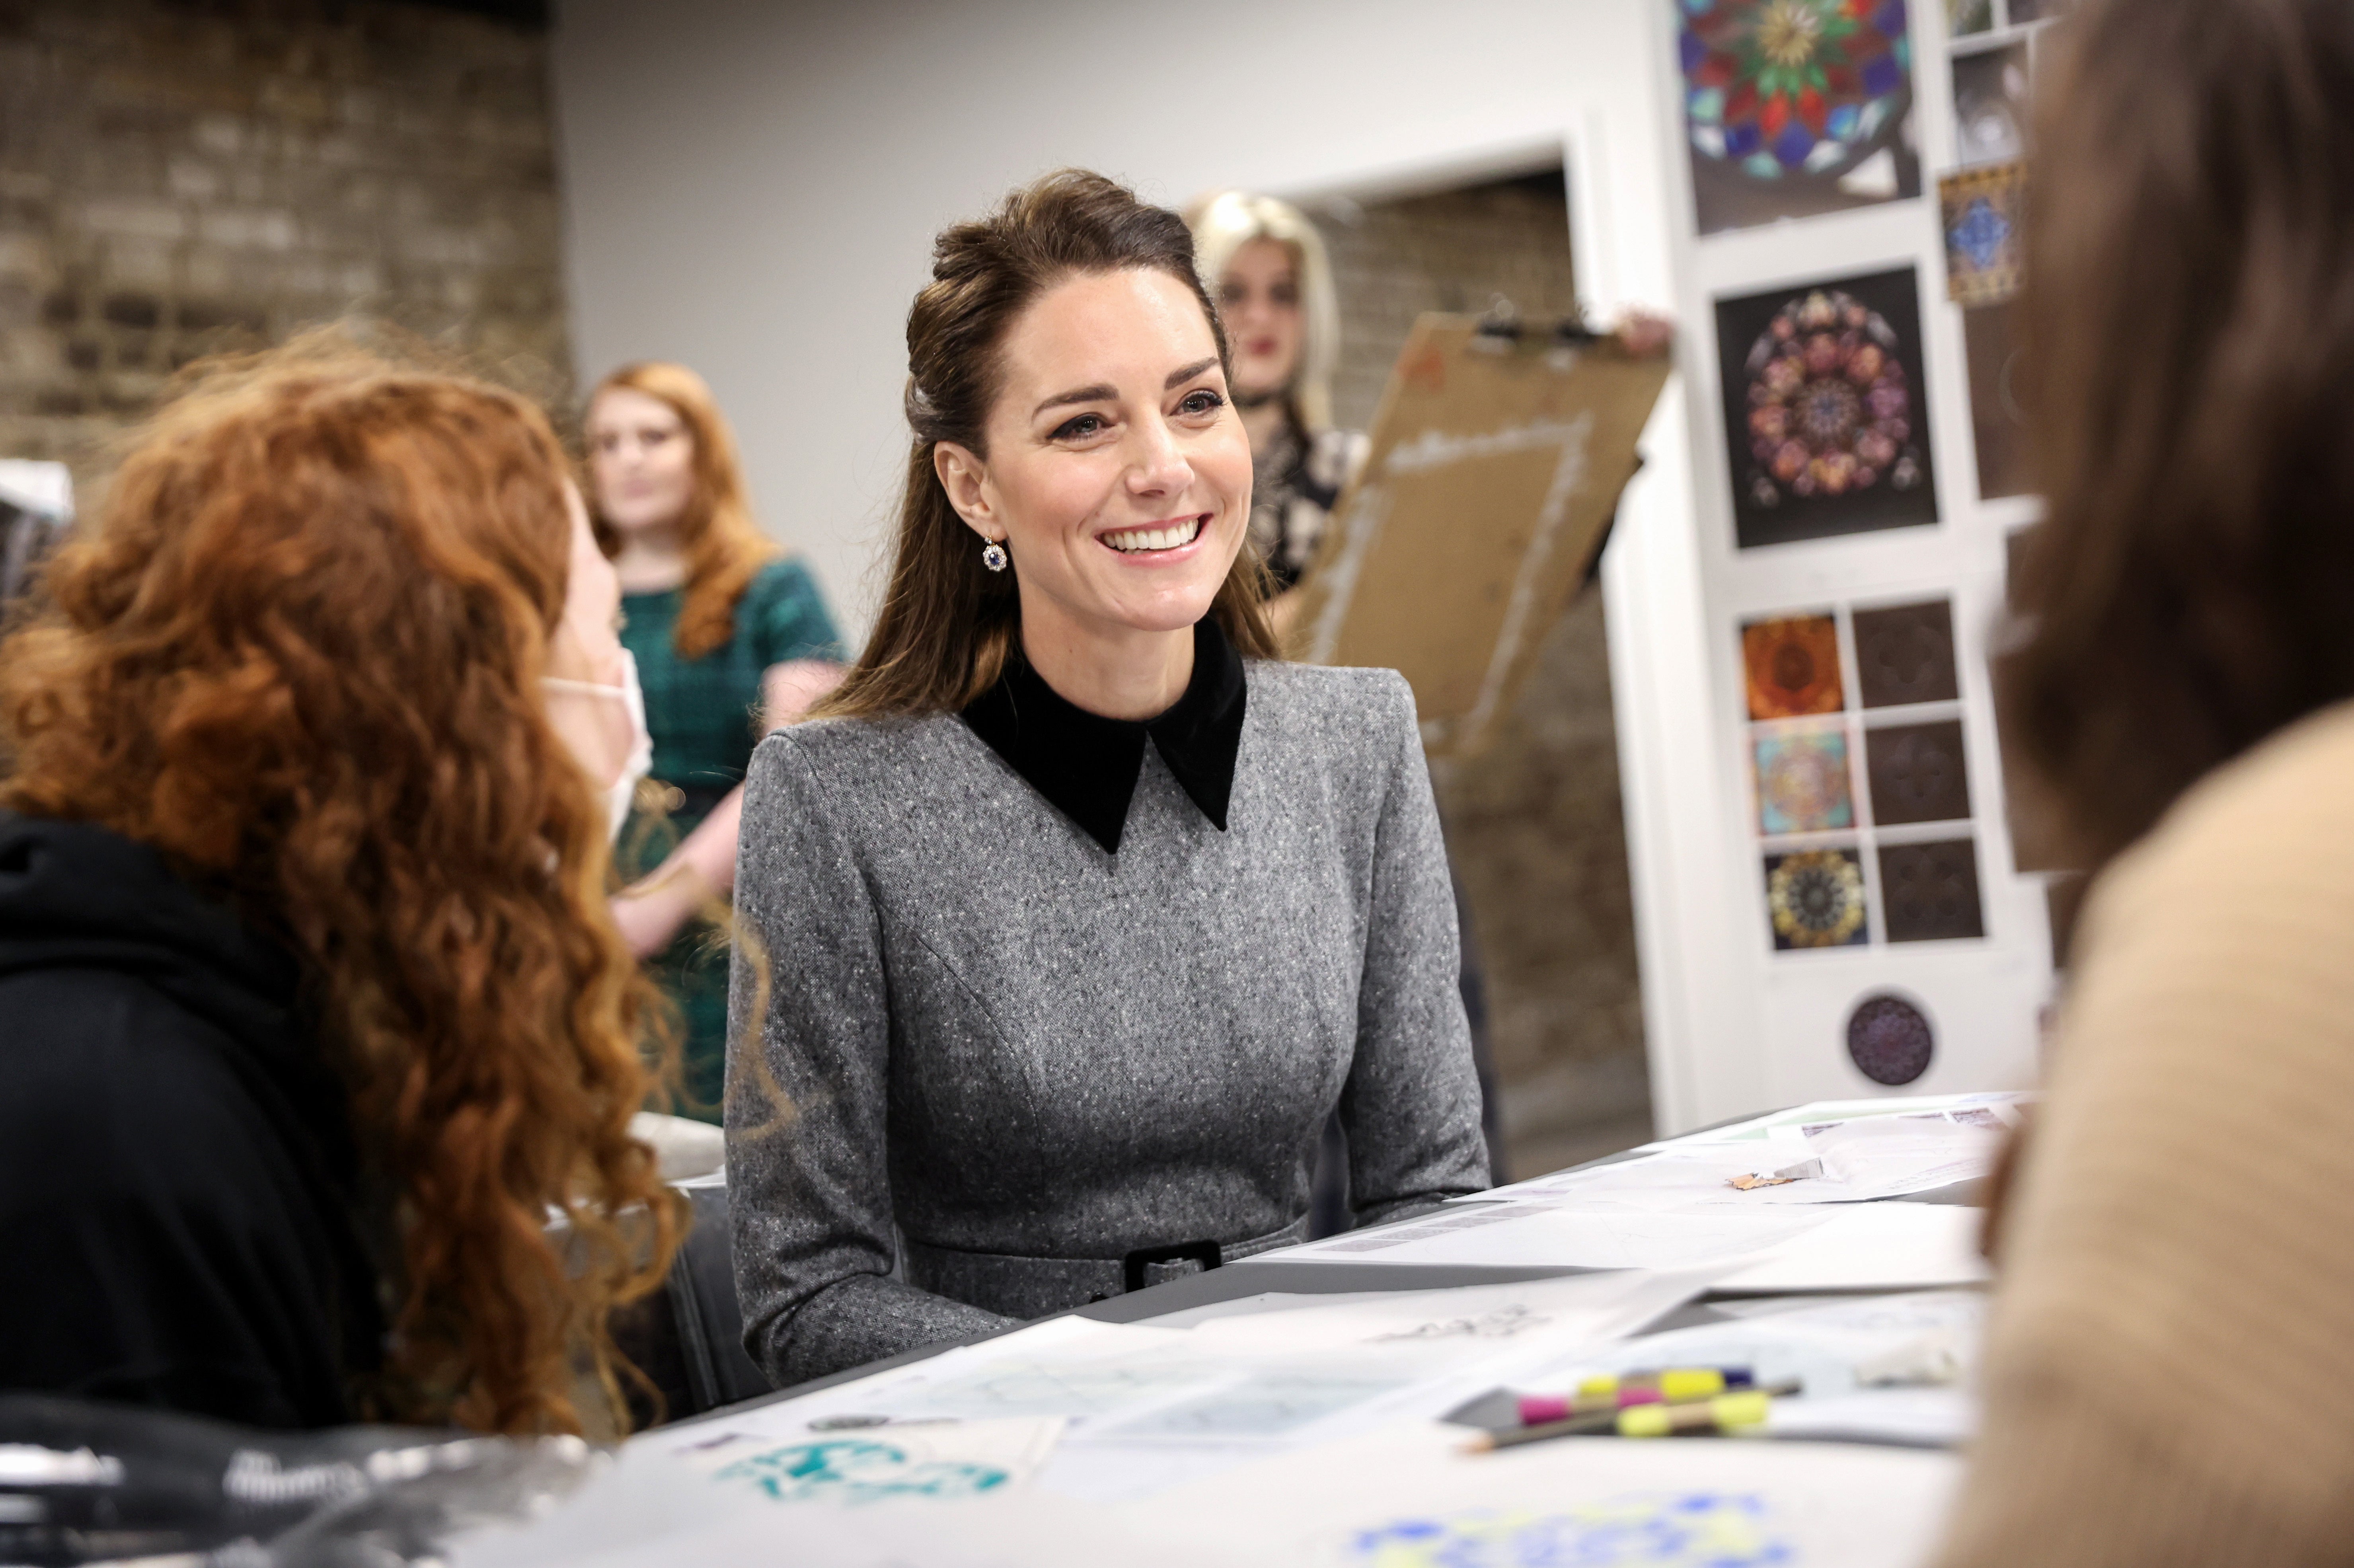 The Duchess of Cambridge during a visit to the Prince’s Foundation’s Trinity Buoy Wharf (Chris Jackson/PA)